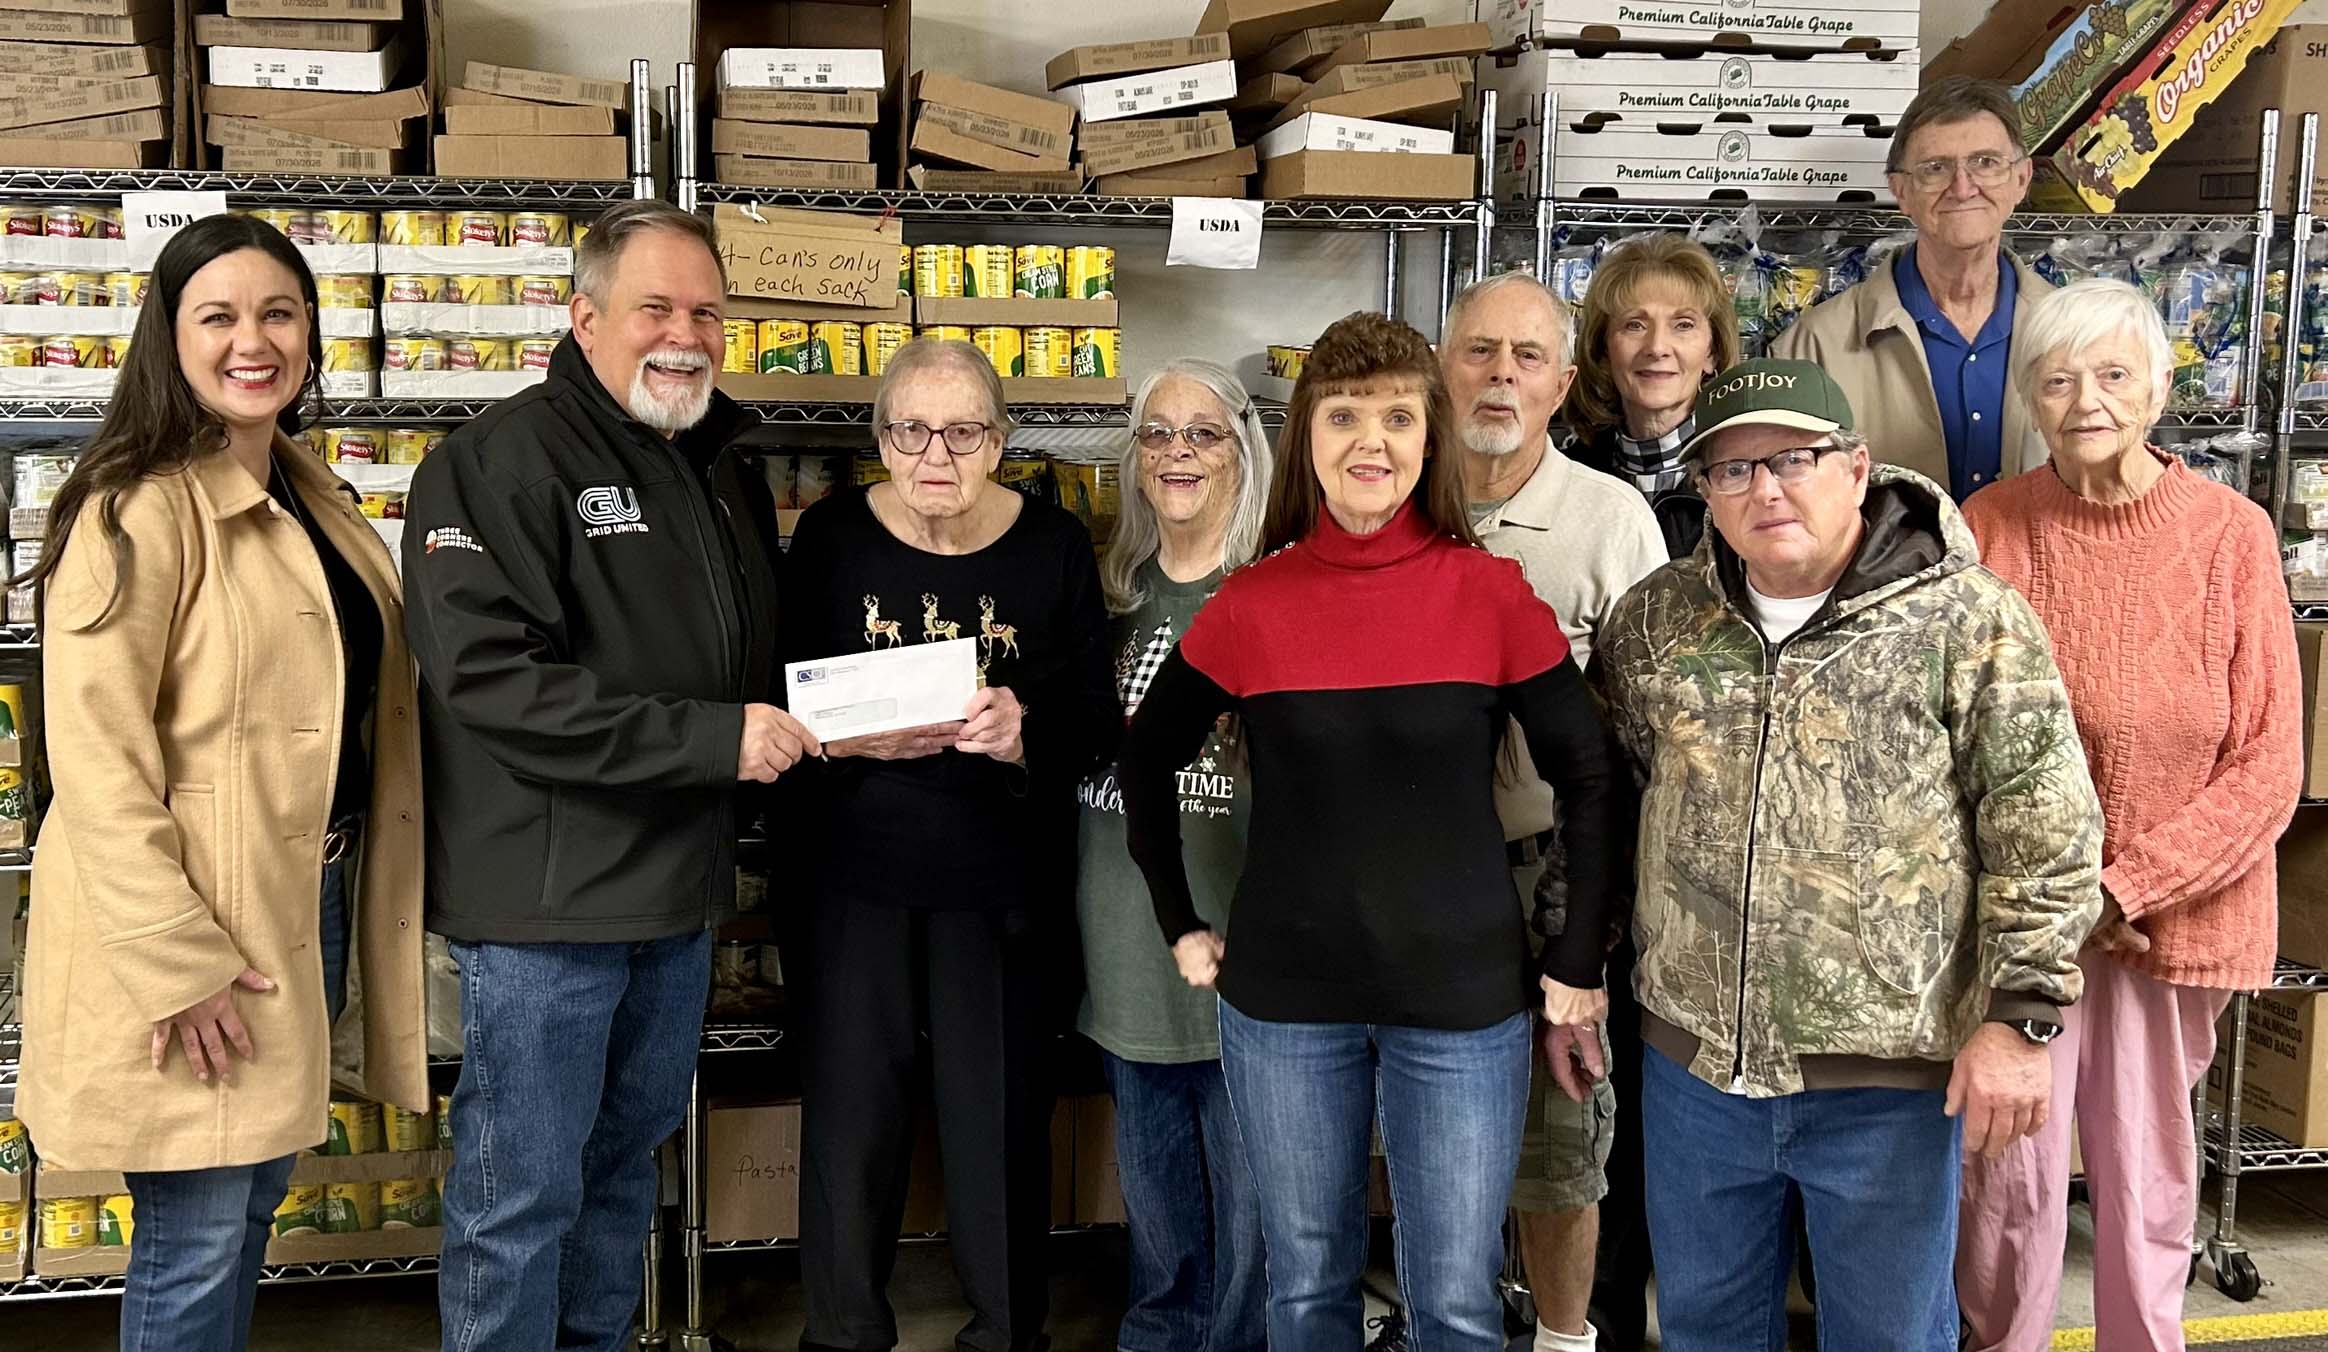 Loaves & Fishes Food Cupboard - pictured left to right - Carrie Sanders, CSCF Executive Director; Alan Manning, Three Corners Connector Project Communications Specialist; presenting the check to Gail Parsley, Loaves & Fishes Manager and volunteers